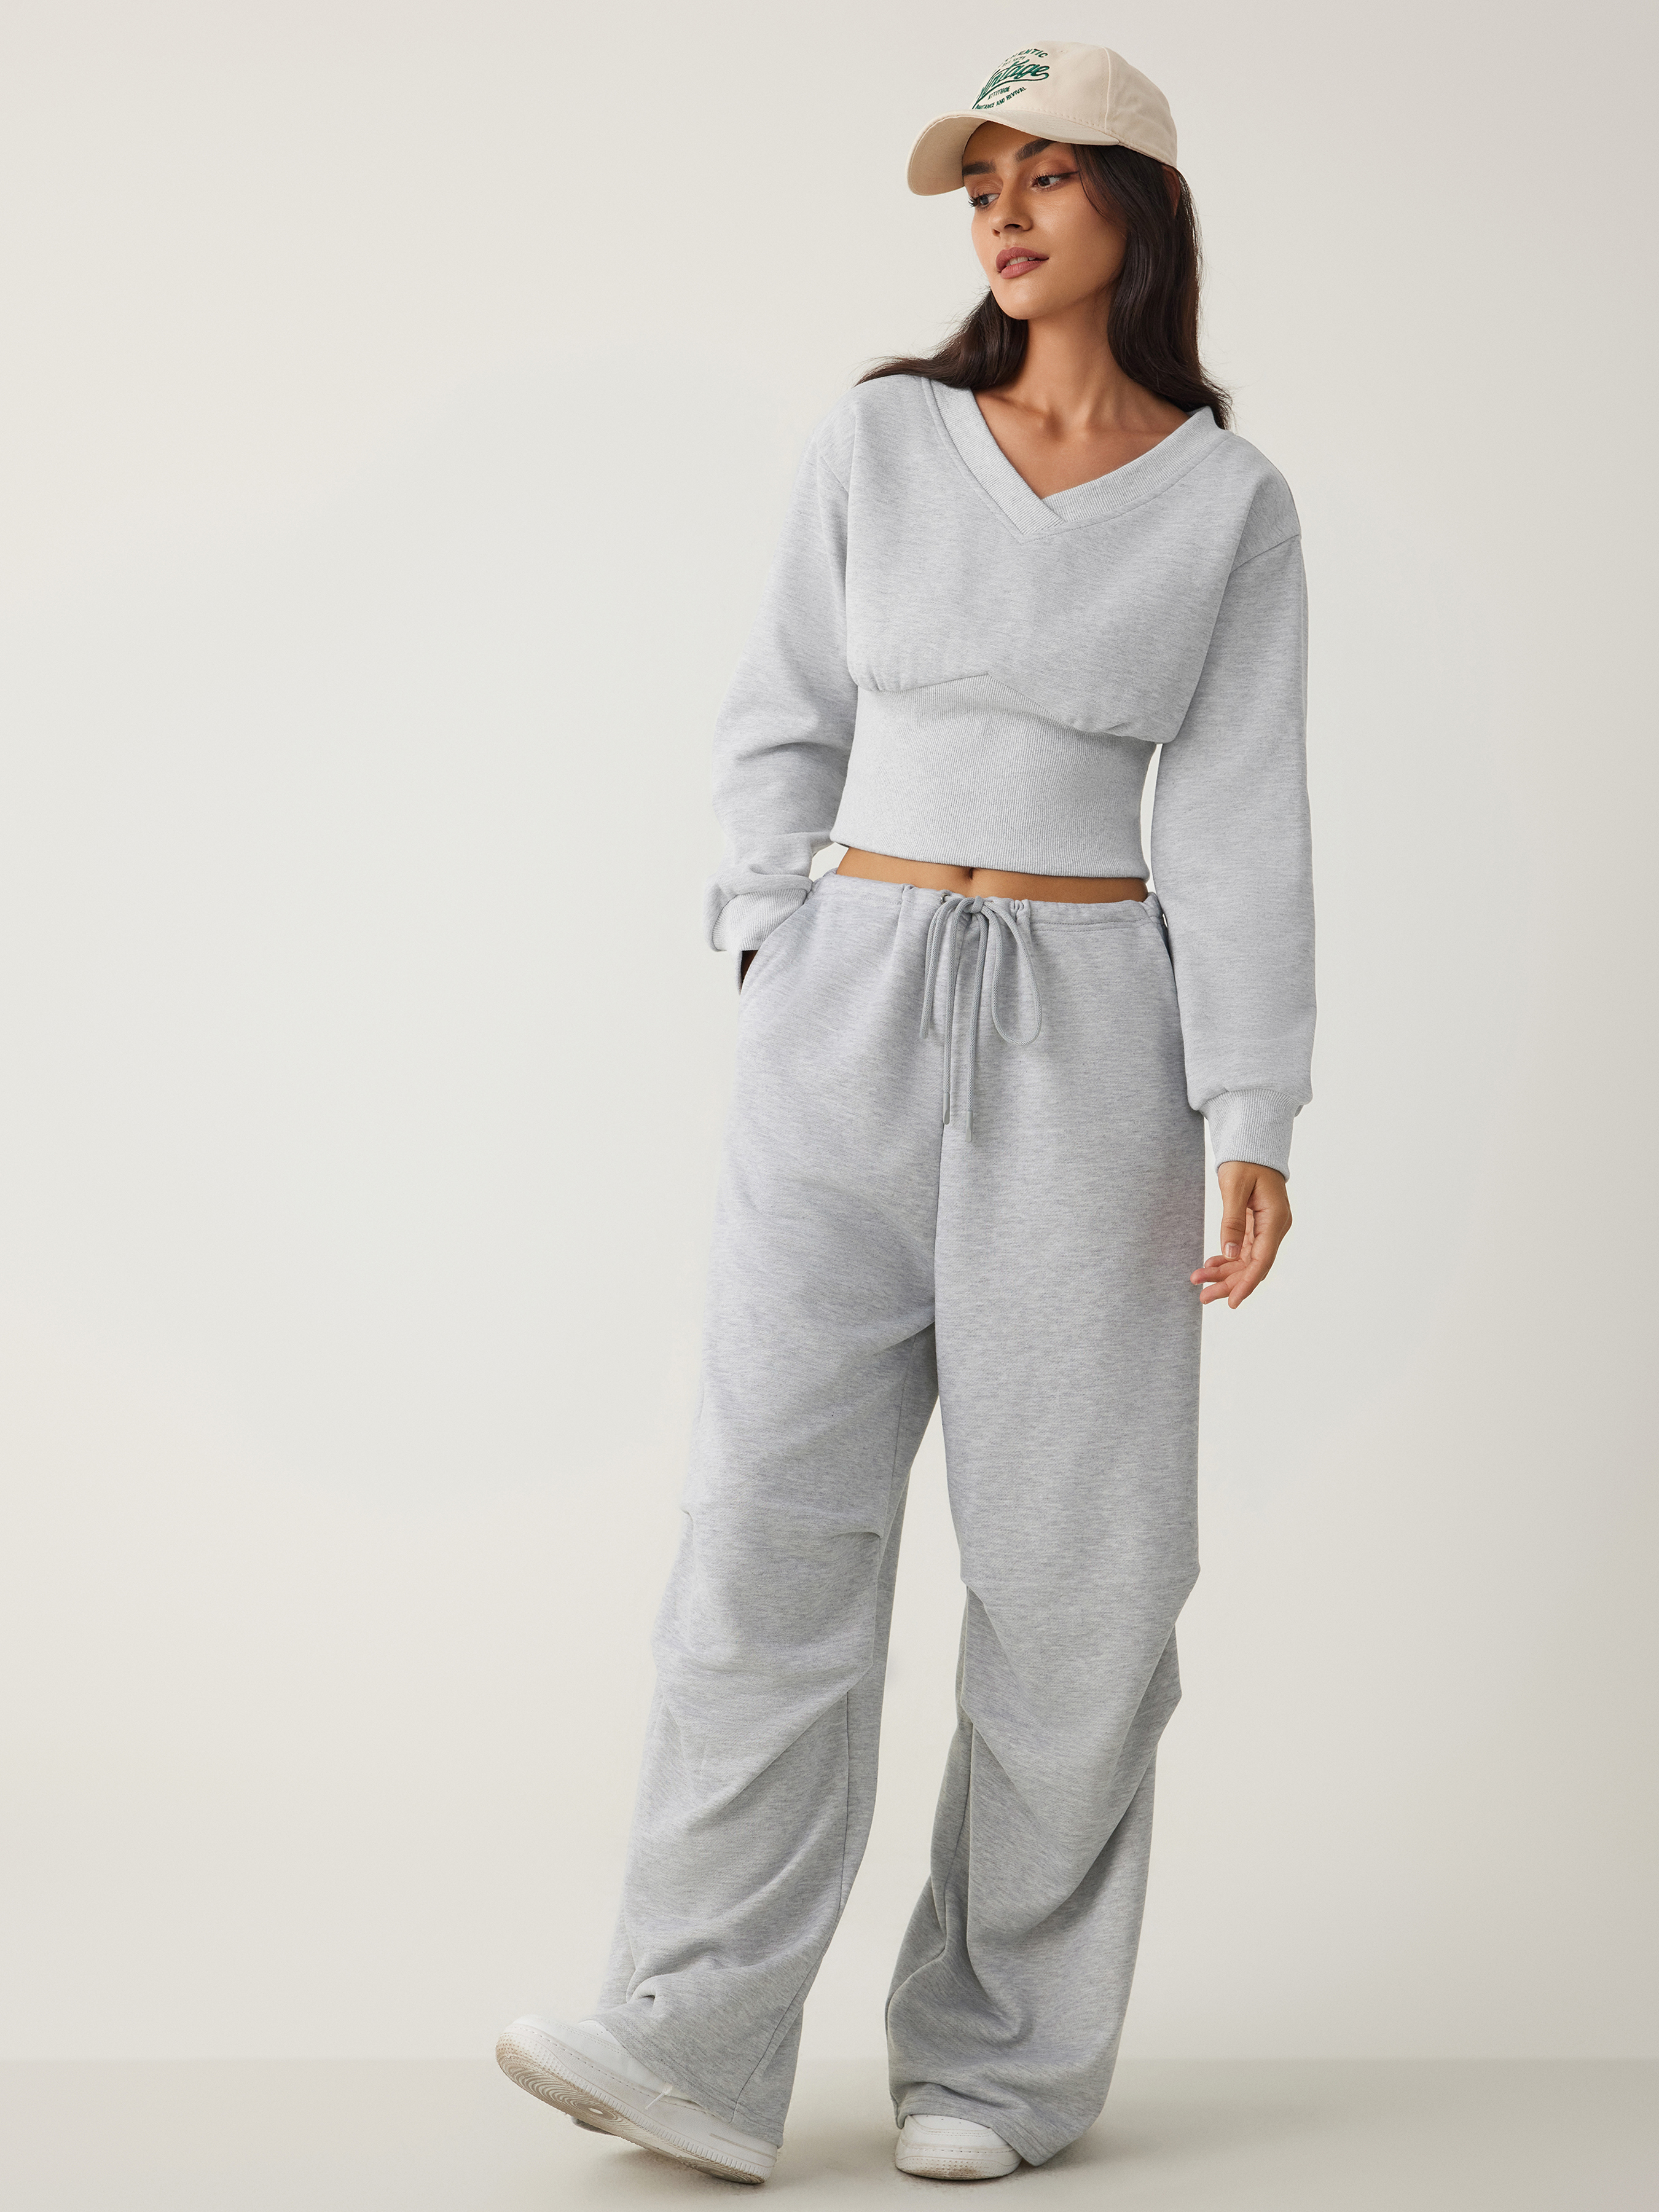 Sweetown Casual Baggy Wide Leg Sweatpants White Loose Drawstring Low W –  Fiticke